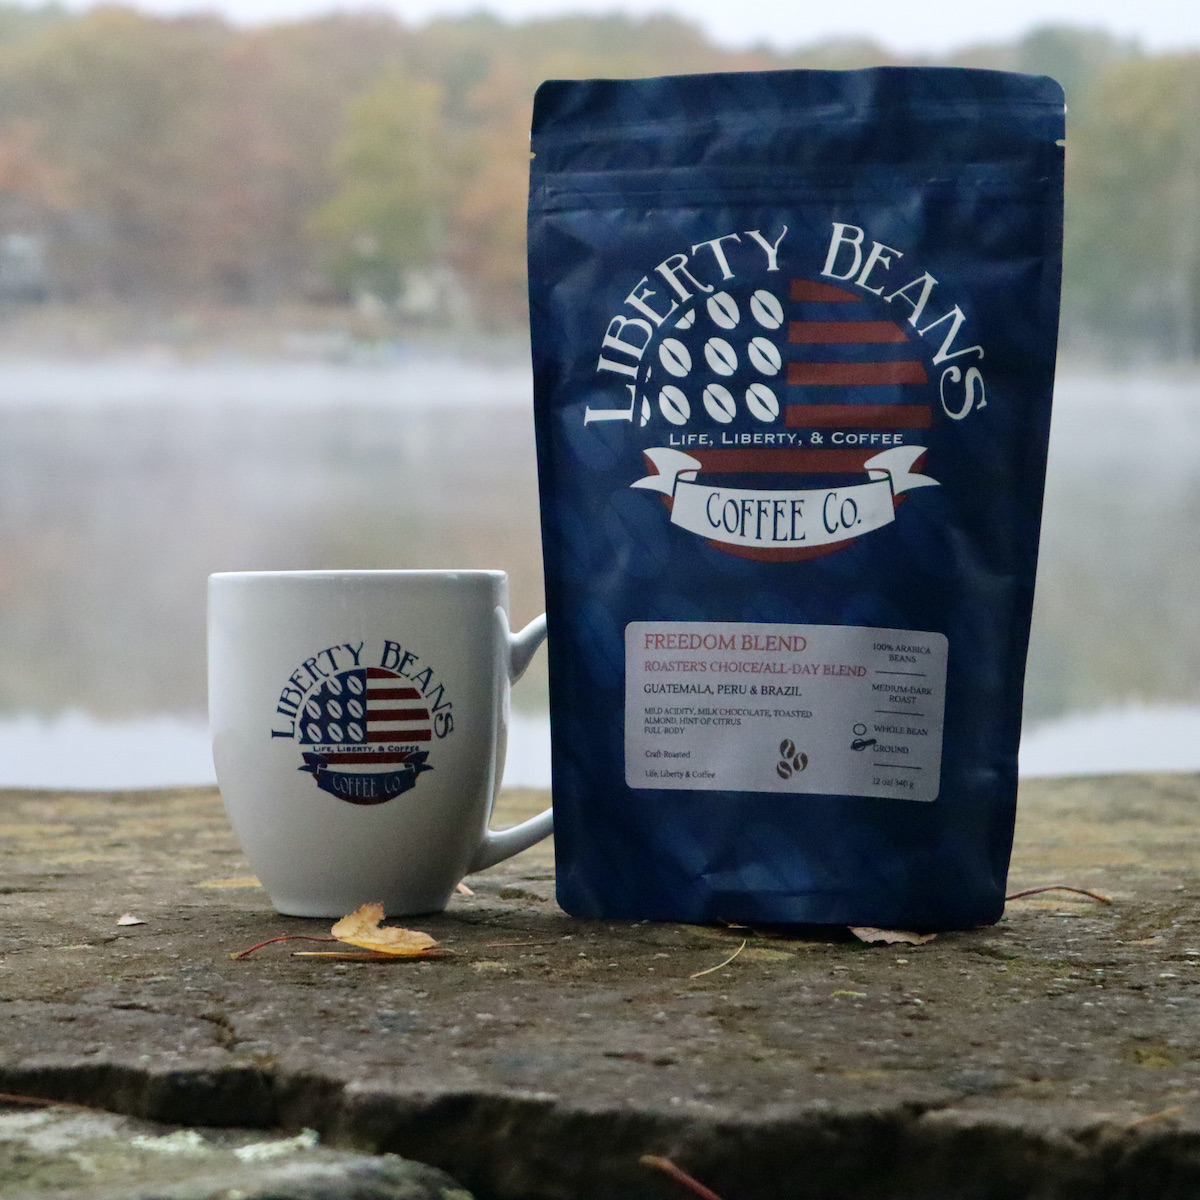 Liberty Beans Coffee, owned by Jim and Diane Morton